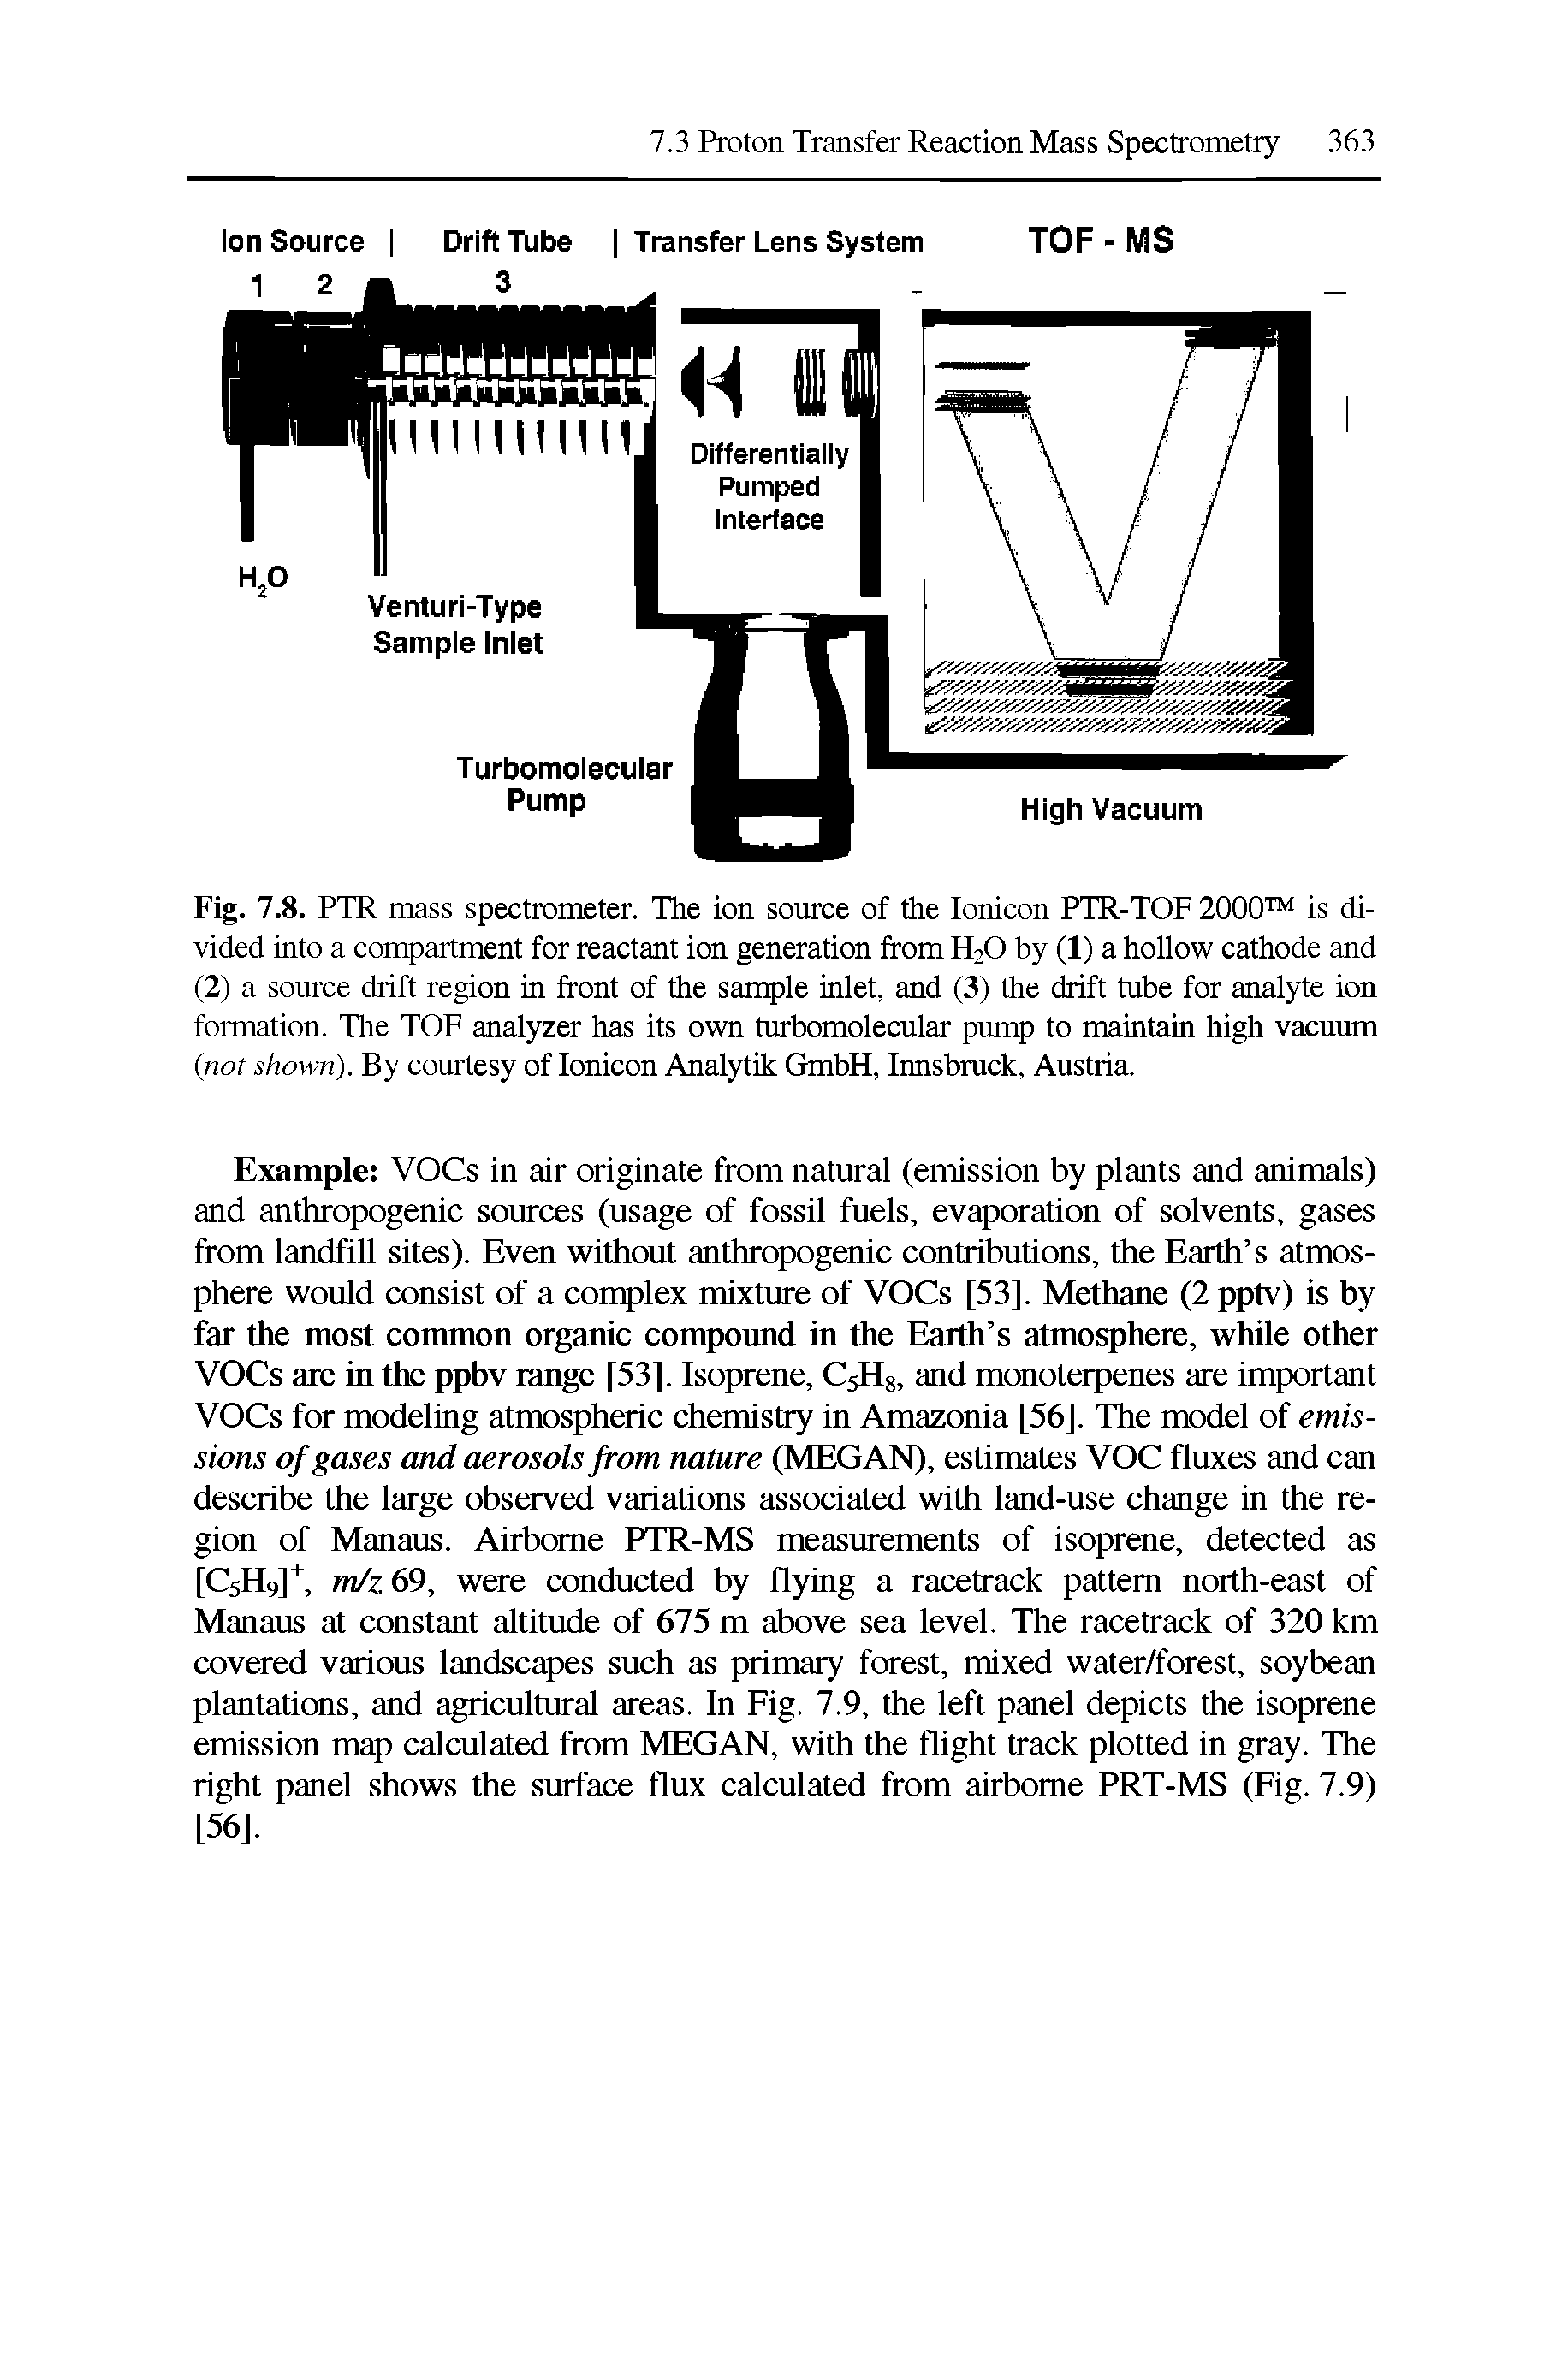 Fig. 7.8. PTR mass spectrometer. The ion source of the lonicon PTR-TOF 2000 is divided into a compartment for reactant ion generation from H2O by (1) a hollow cathode and (2) a source drift region in front of the sample inlet, and (3) the drift tube for analyte ion formation. The TOF analyzer has its own turbomolecular pump to maintain high vacuum not shown). By courtesy of lonicon Analytik GmbH, Innsbrack, Austria...